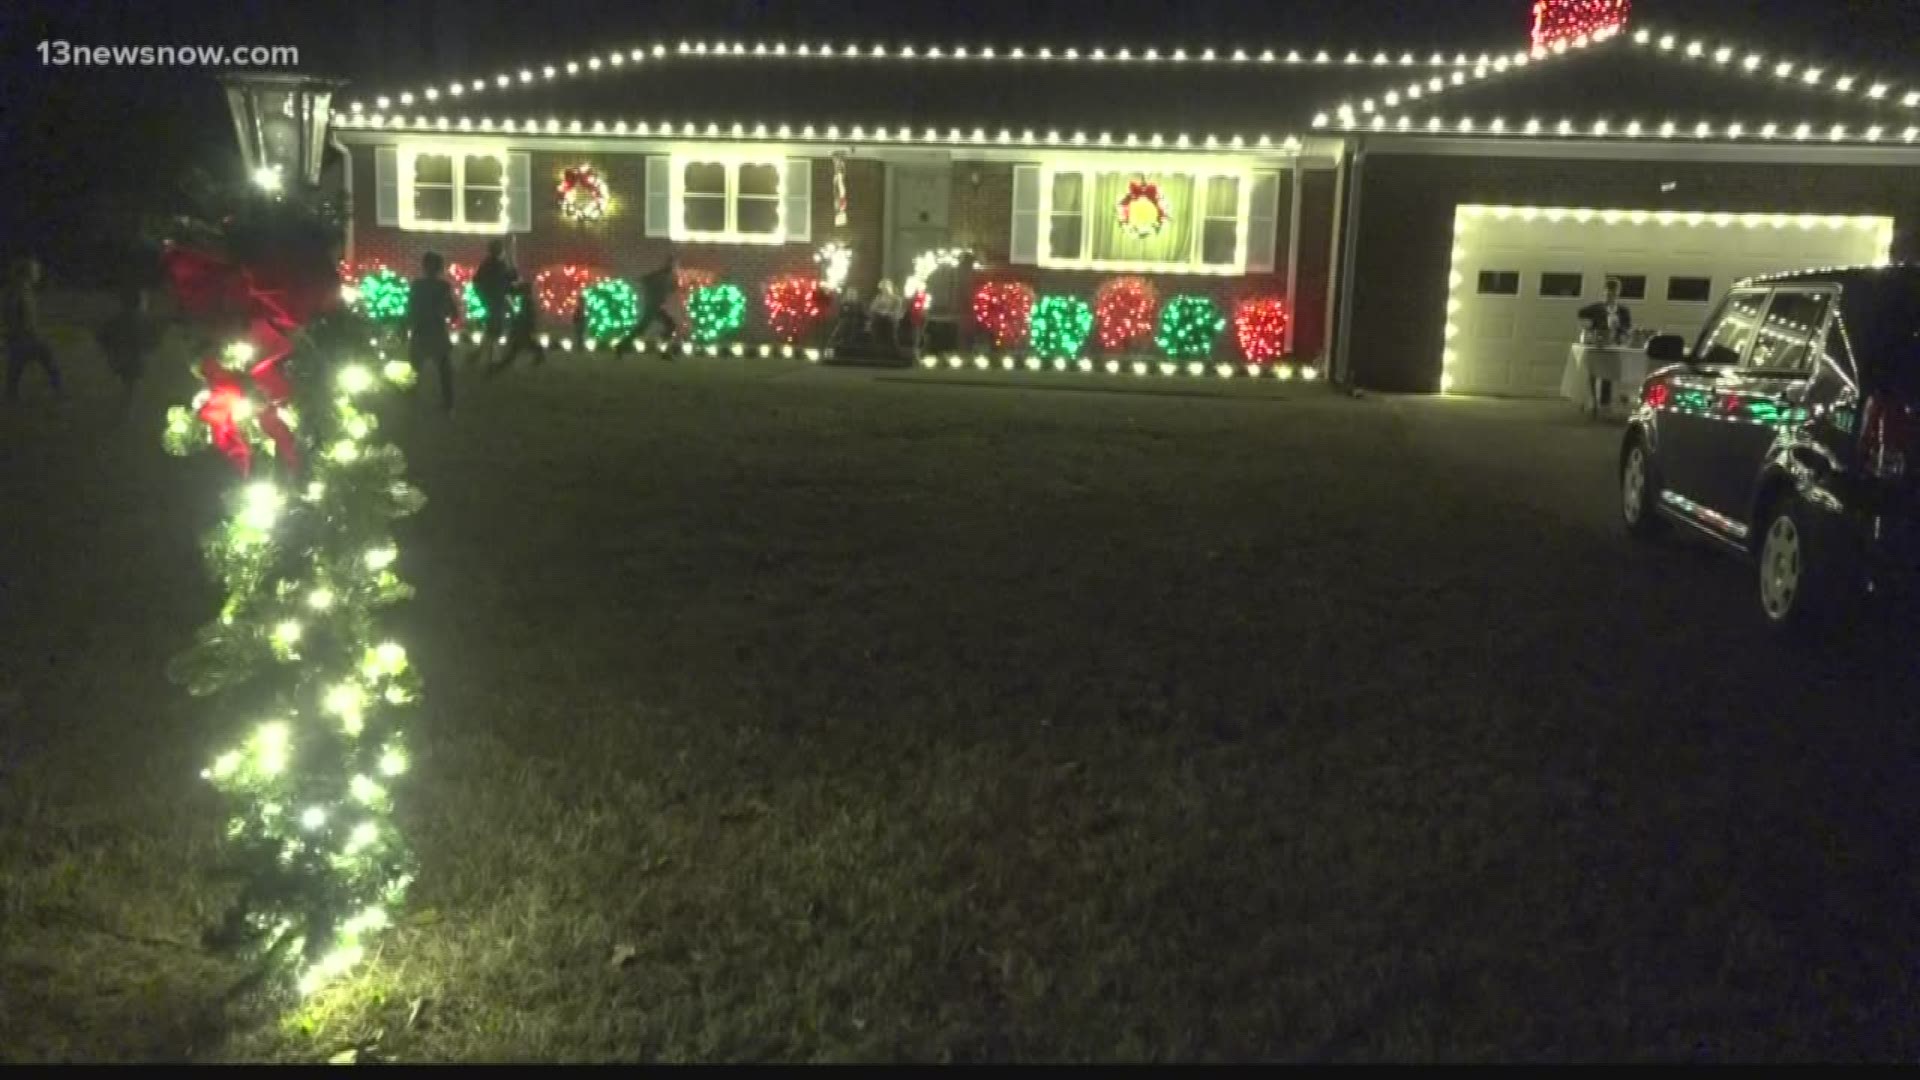 A Virginia Beach family's holiday season was uplifted tonight with the power of light.